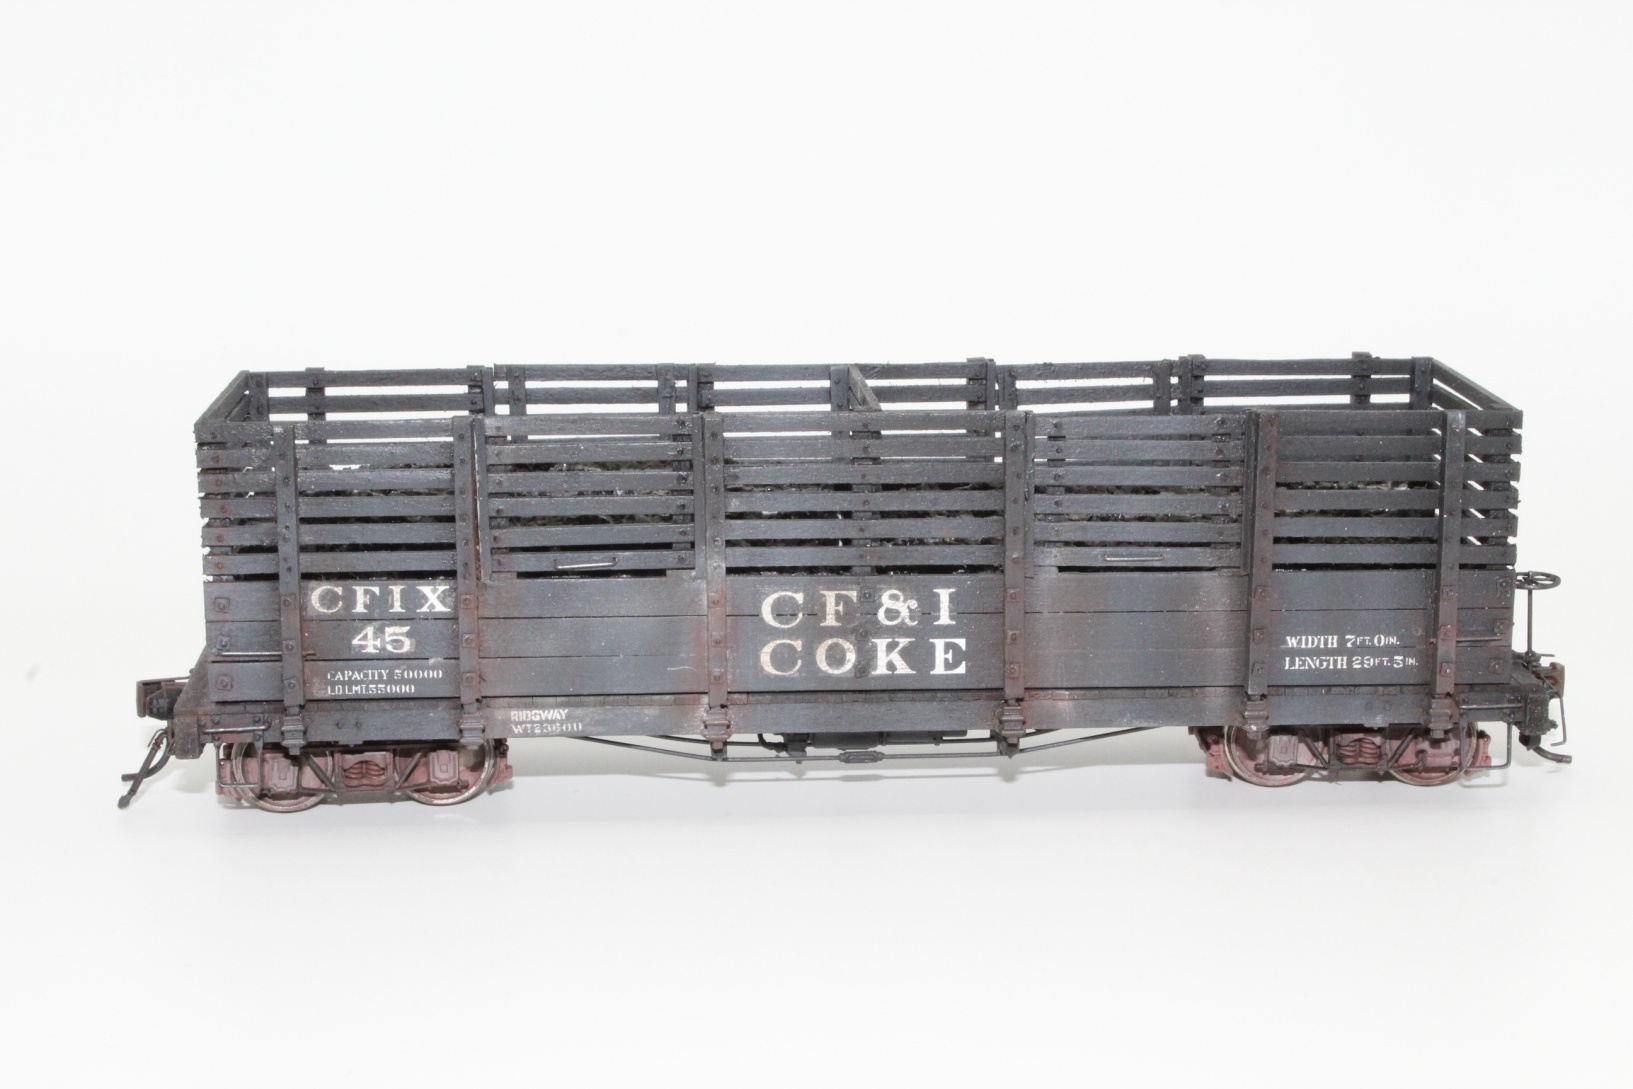 Freight Car Contest Entry 2021